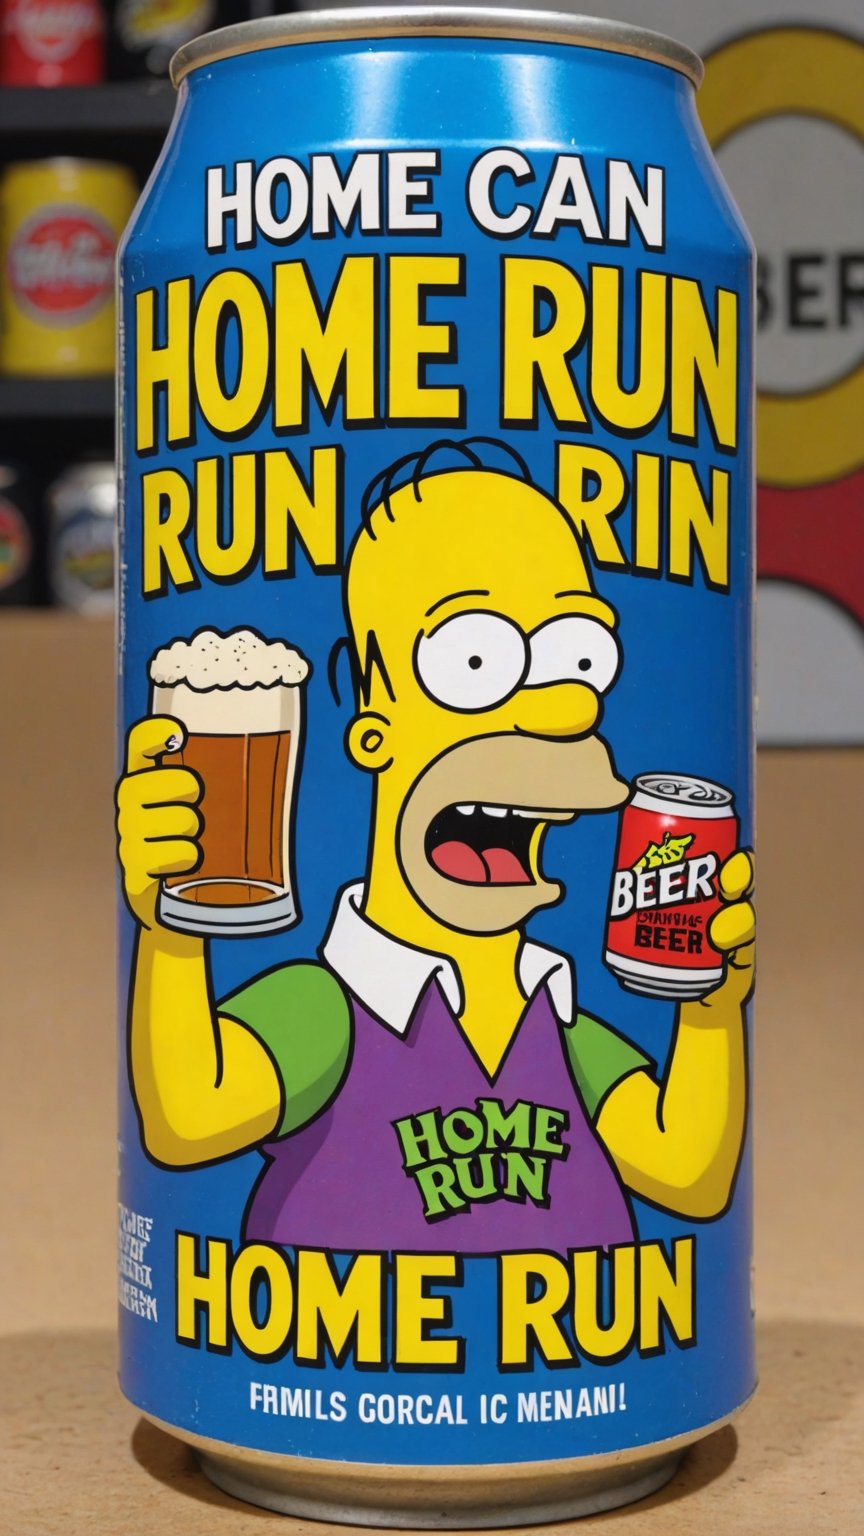 photo of Homer Simpson as Joker in beer can with text that says "home run beer"